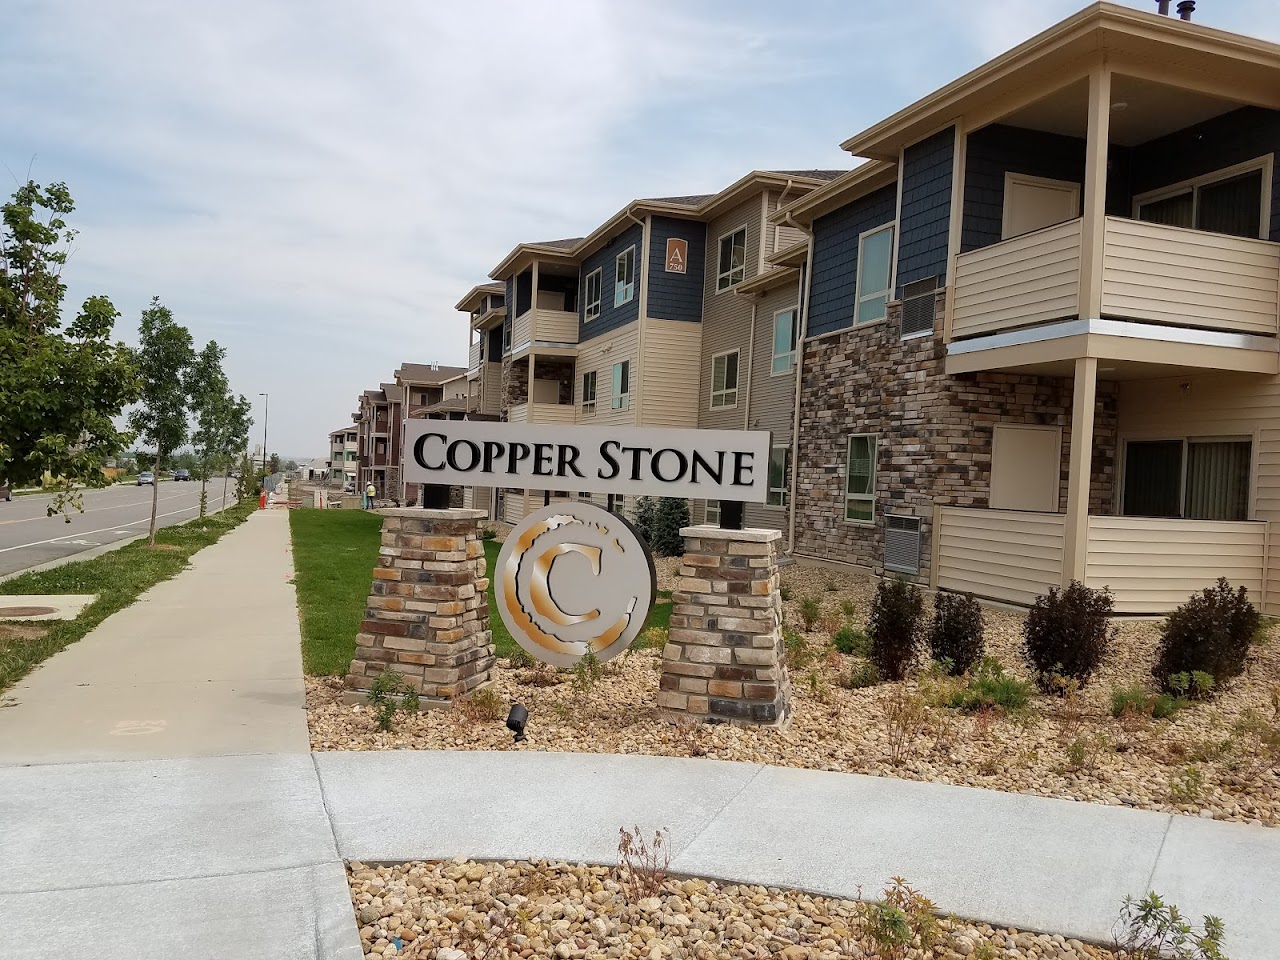 Photo of COPPER STONE APARTMENTS. Affordable housing located at 750 SOUTH LAFAYETTE DRIVE LAFAYETTE, CO 80026